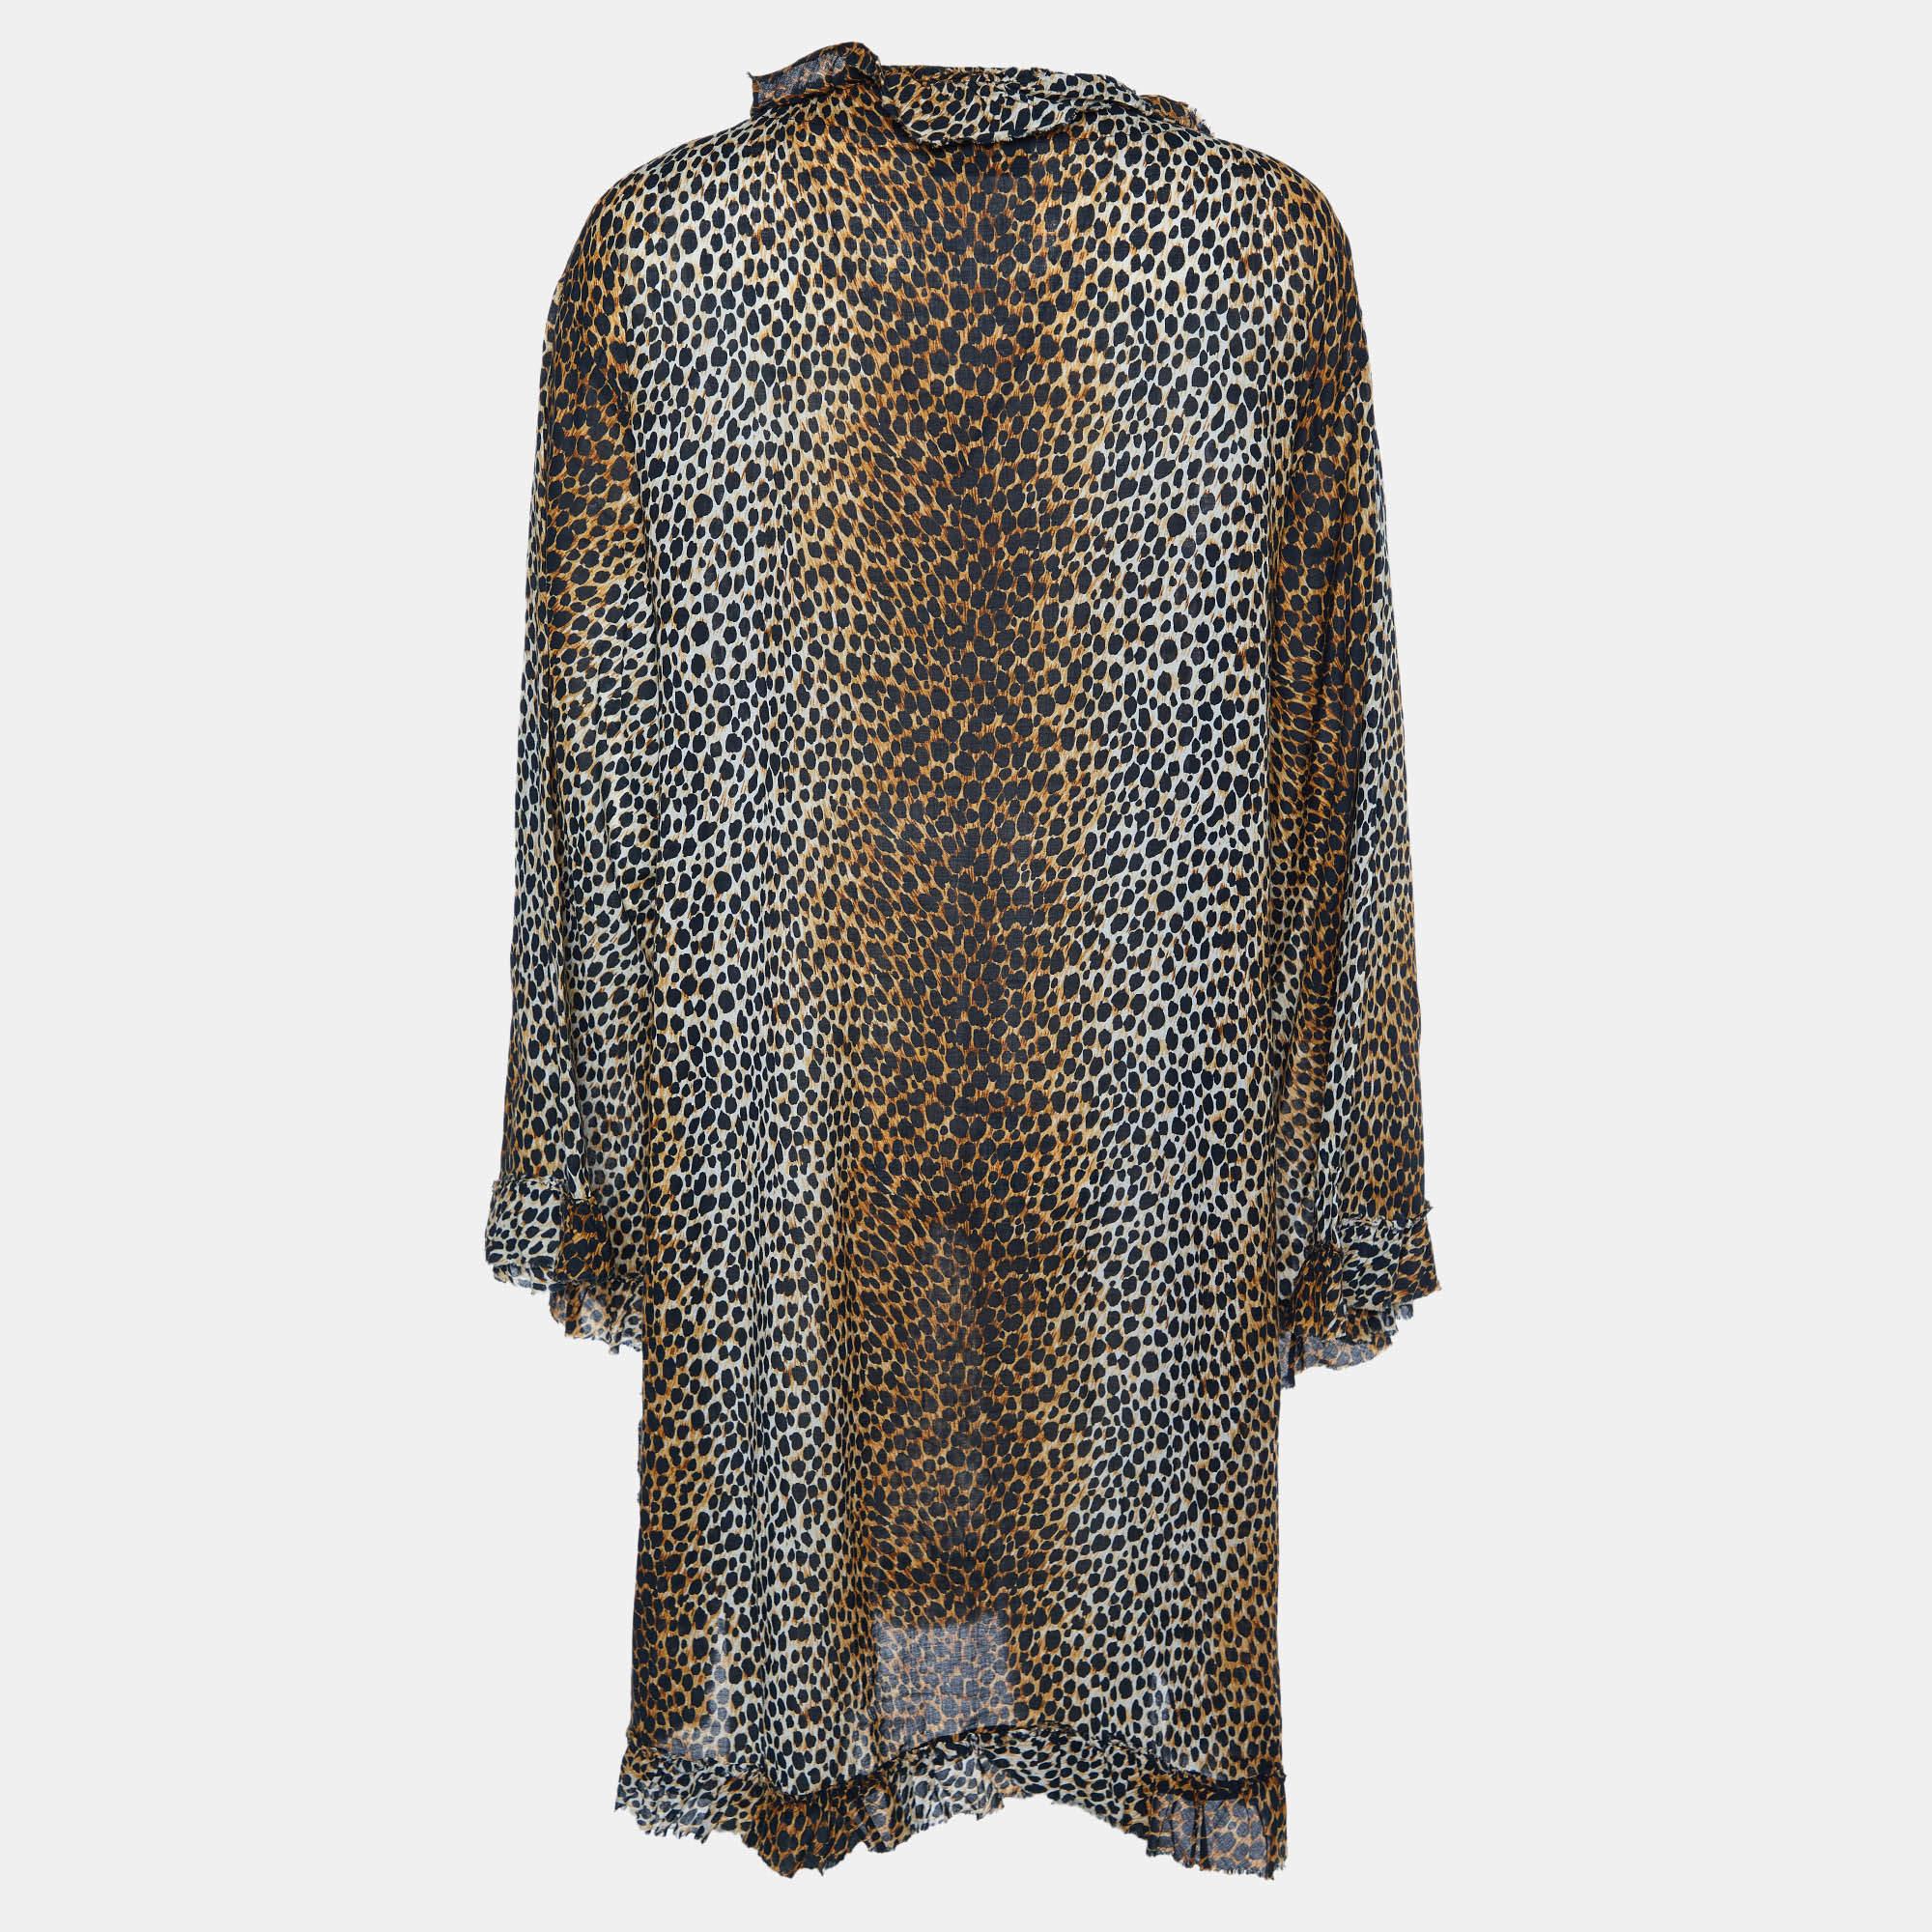 This D&G animal print dress brings elegant details and a lovely silhouette. It is made from the finest materials and is bound to give you comfort.

